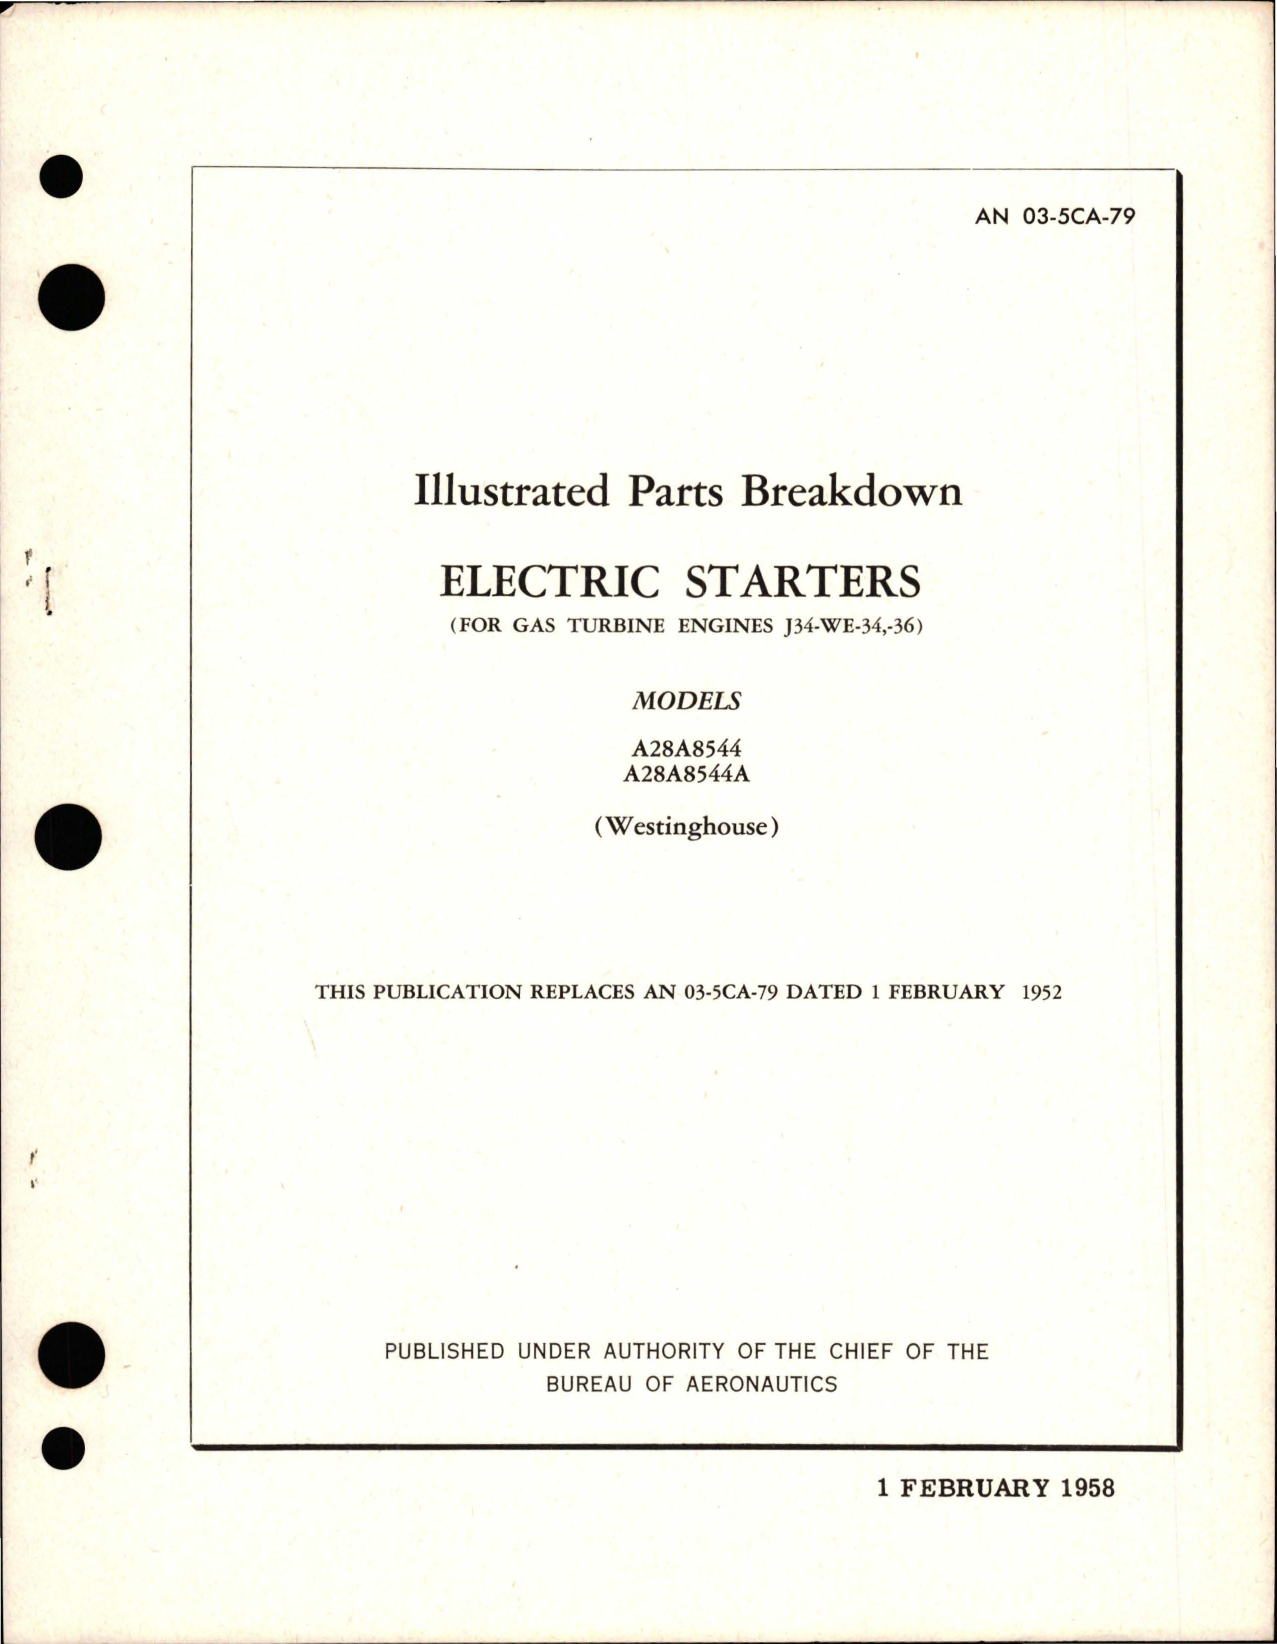 Sample page 1 from AirCorps Library document: Illustrated Parts Breakdown for Electric Starters (Gas Turbine Engines - J34-WE-34, J34-WE-36) - Models A28A8544, A28A8544A